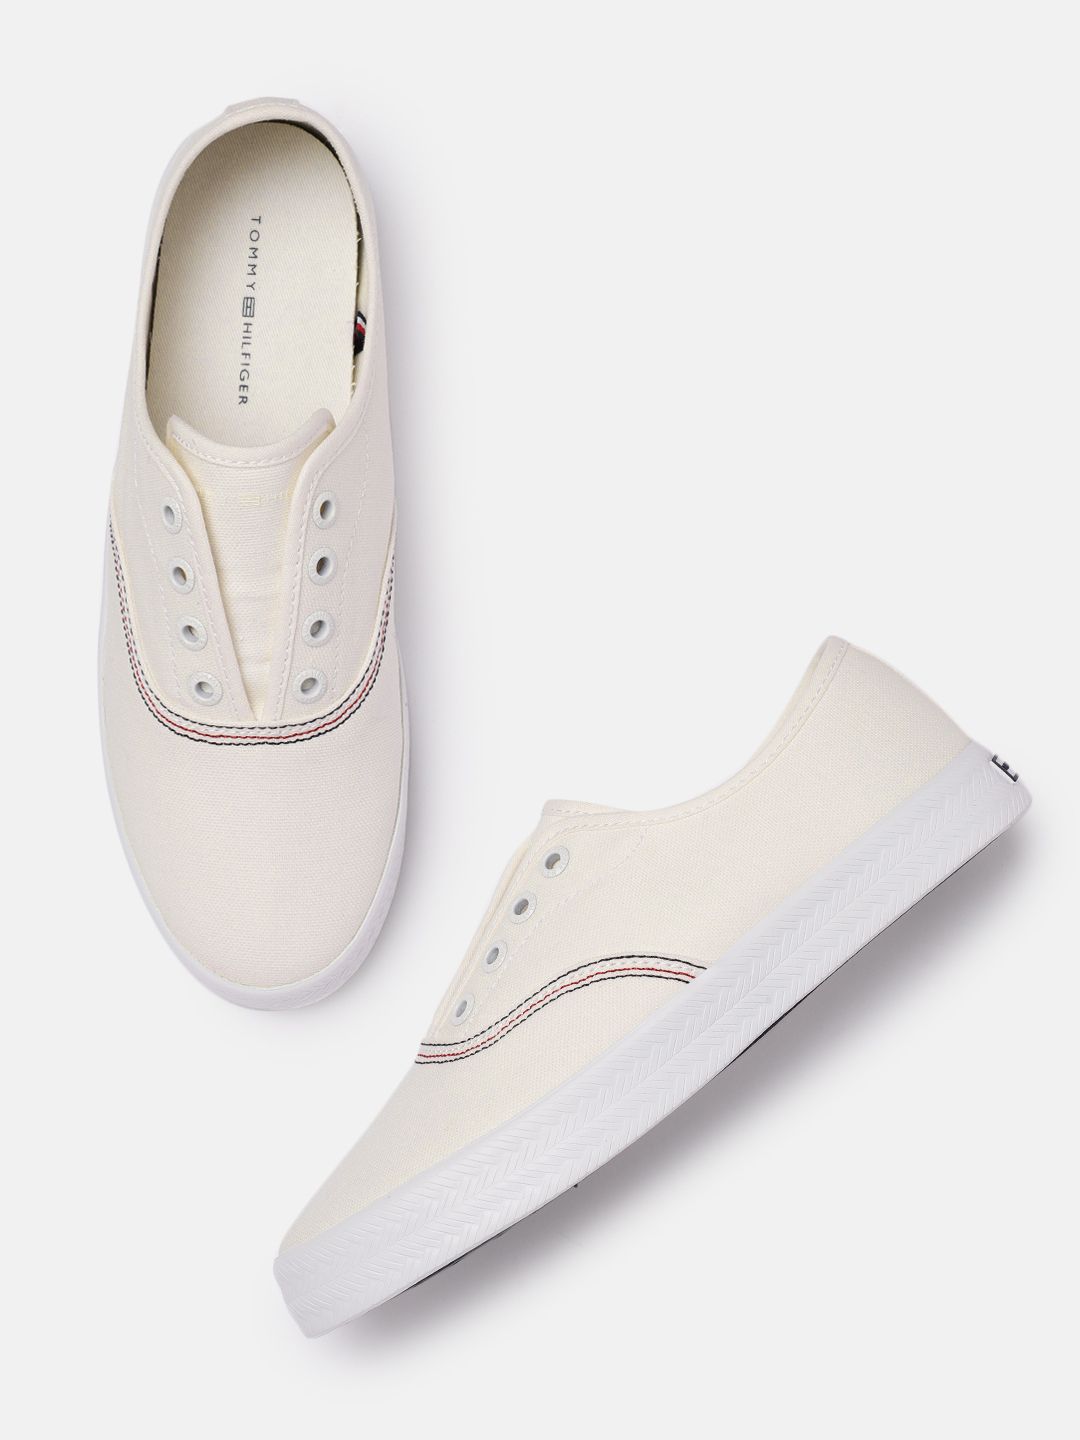 Tommy Hilfiger Women Off White Slip-On Sneakers Price in India